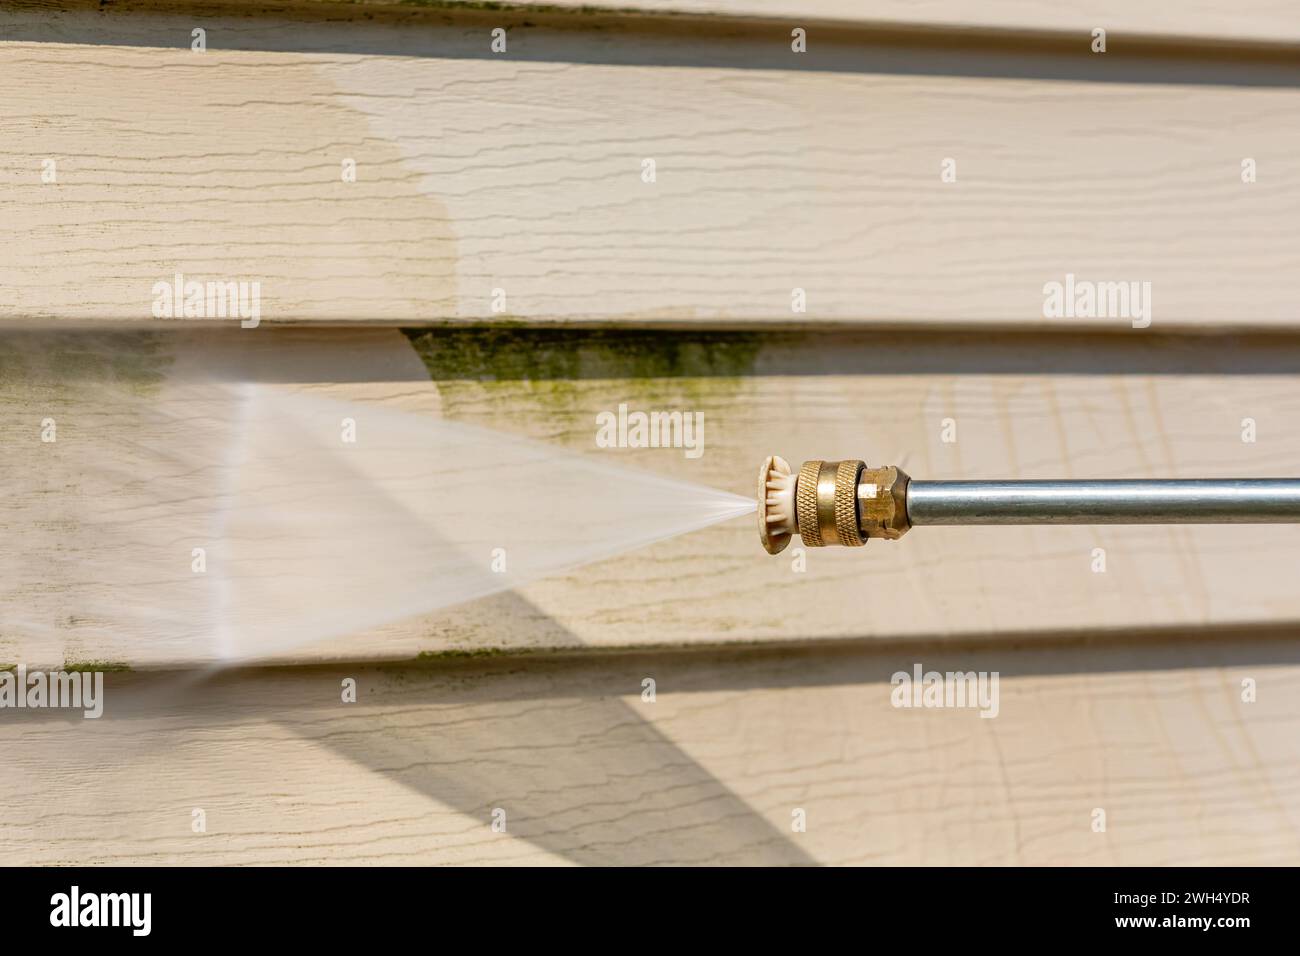 Cleaning algae, mold and mildew from vinyl siding of house with pressure washer. Home repair, maintenance and exterior cleaning concept. Stock Photo